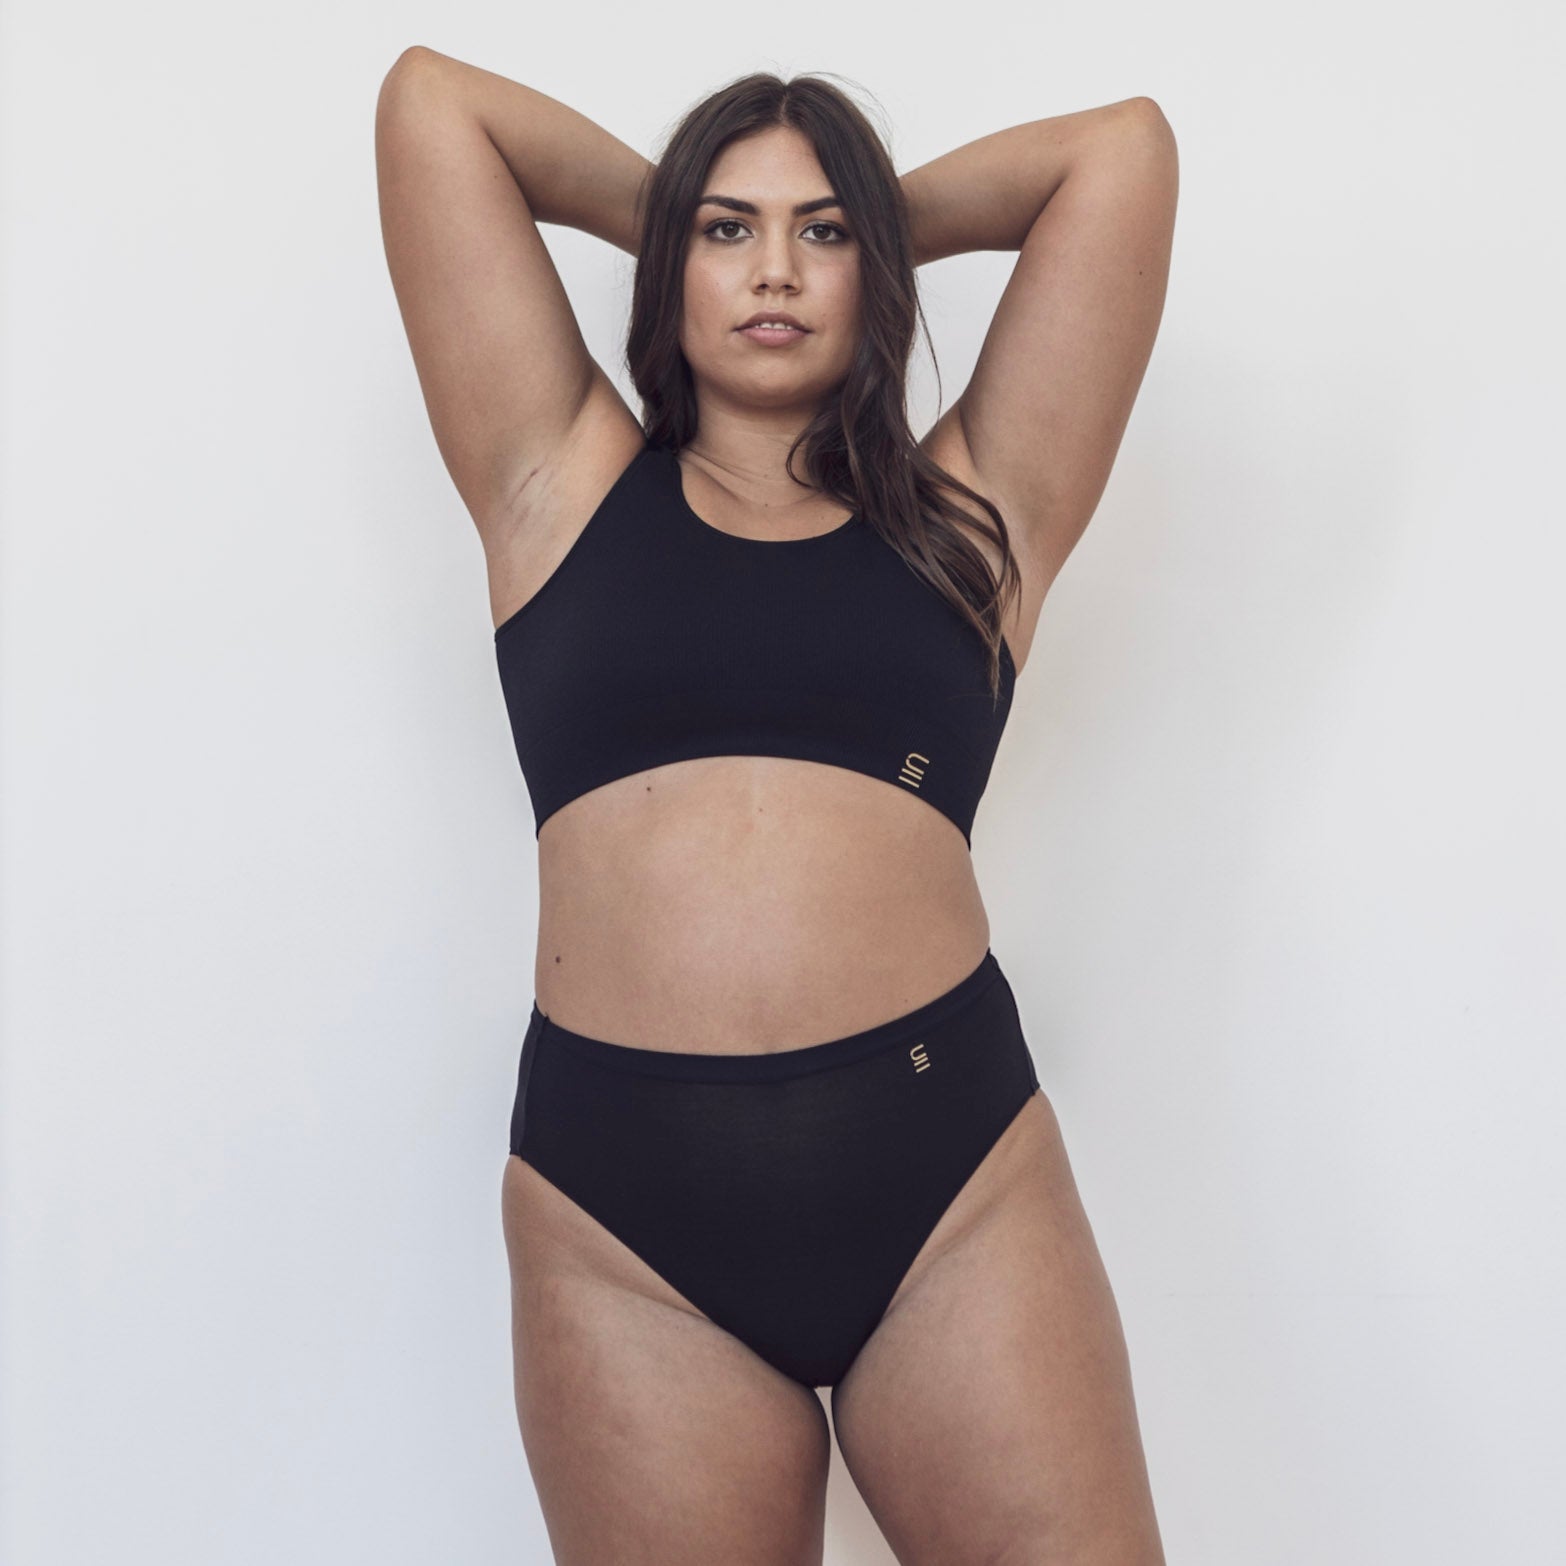 Sustainable black high waist brief by Underwear for Humanity: ethical, sustainable. sizes 6-26. light, breathable. Models wear high-waisted underwear. underwear sits high on the waist, full seat coverage. smooth under clothing. made from Tencel and recycled materials